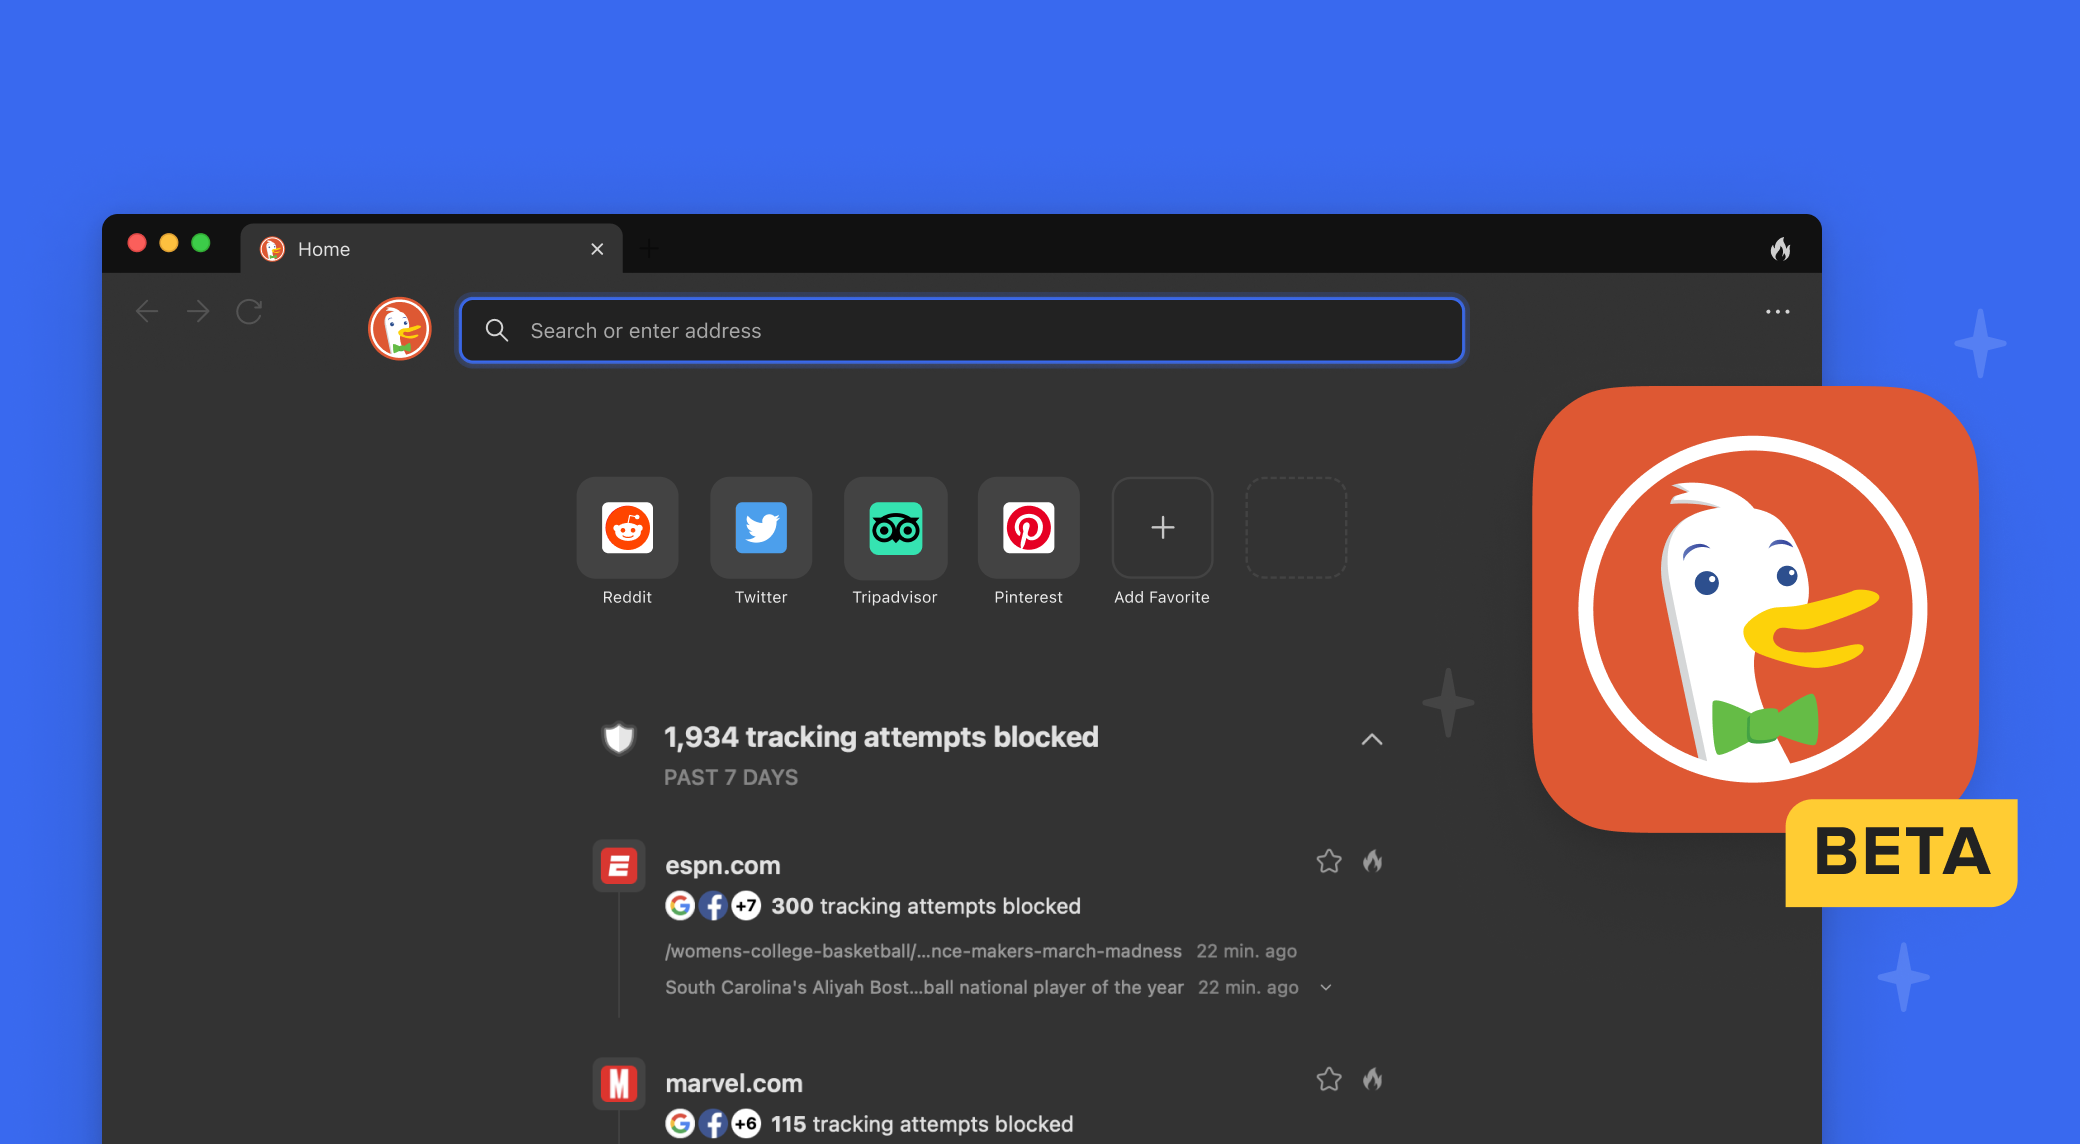 macOS users can now sign up to test DuckDuckGo's desktop privacy browser